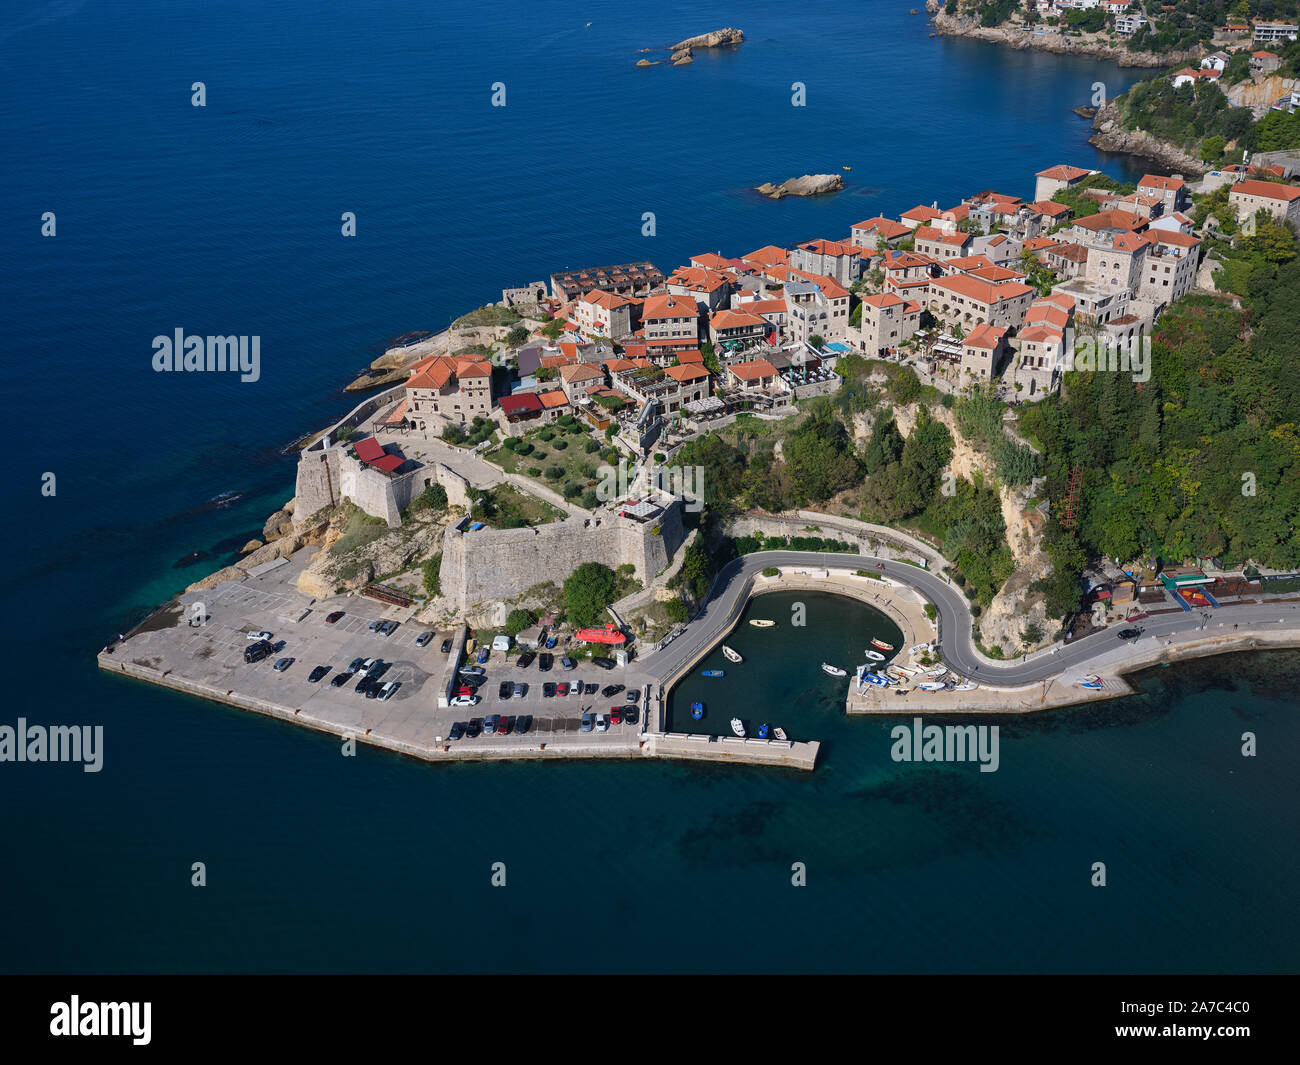 AERIAL VIEW. Historic town on a rocky promontory above the Adriatic Sea. Ulcinj, Montenegro. Stock Photo